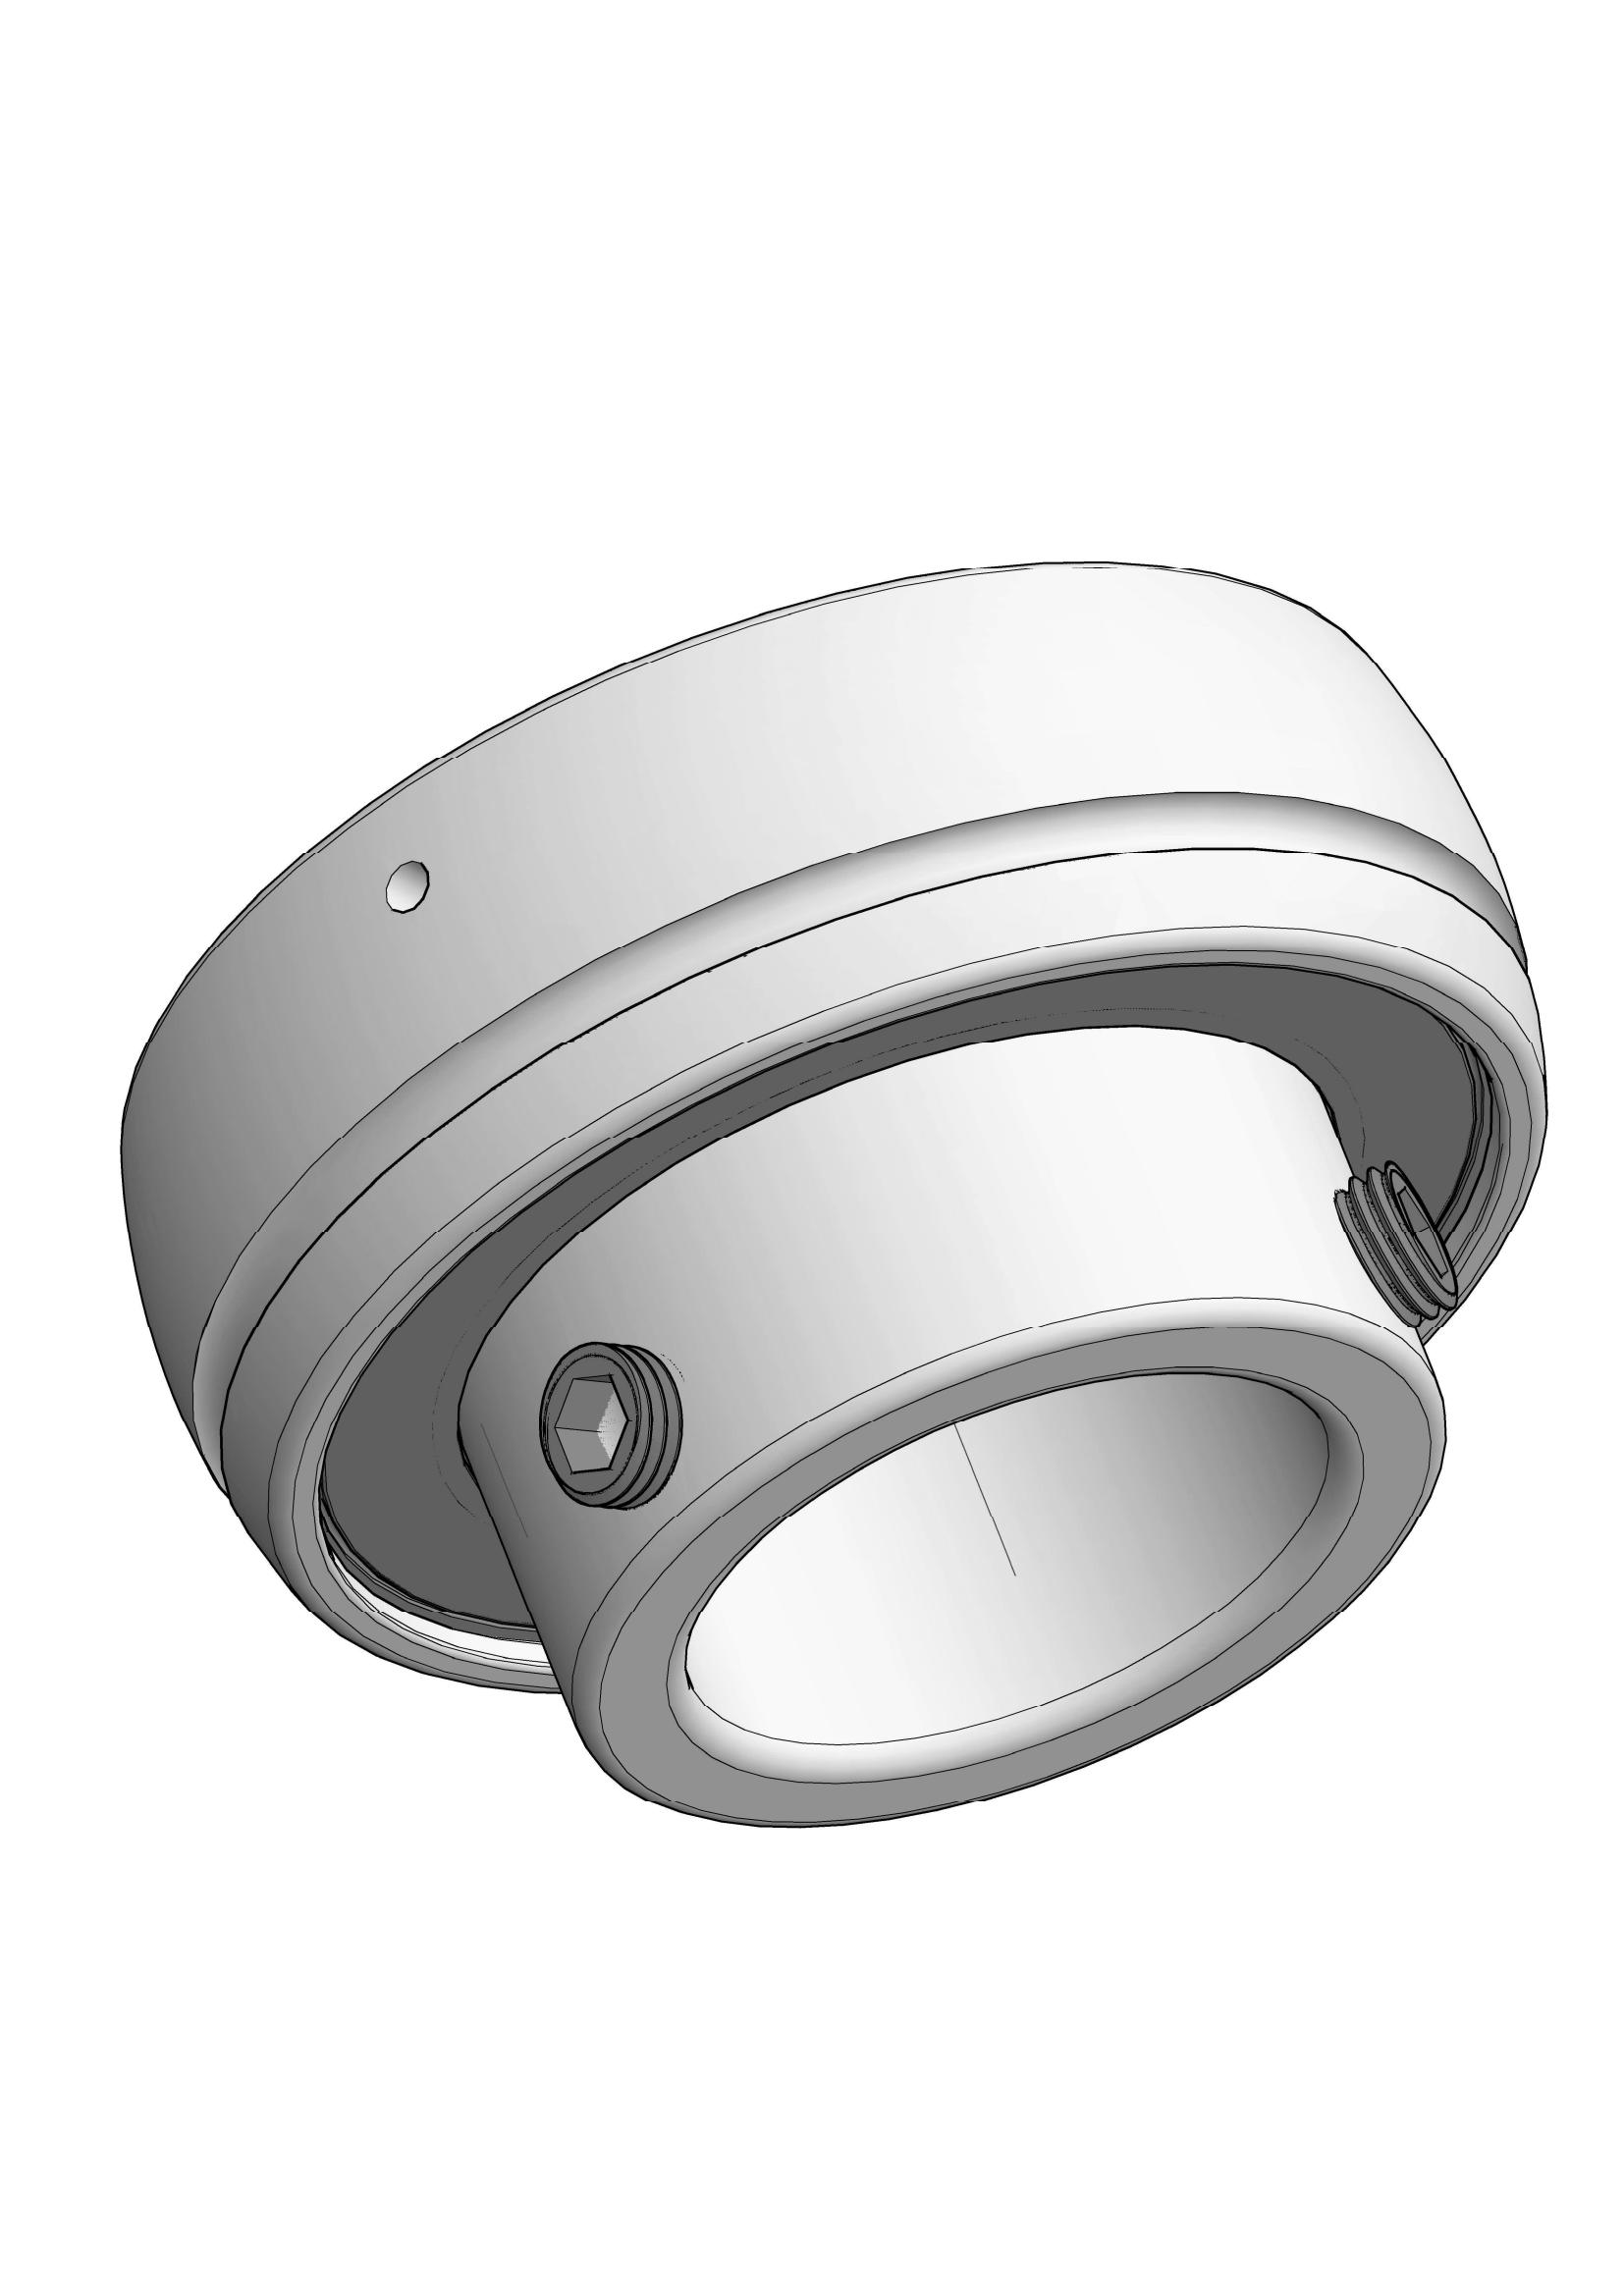 SB208-24 insert ball bearings with Eccentric Collar Lock with 1-1/2 inch Bore